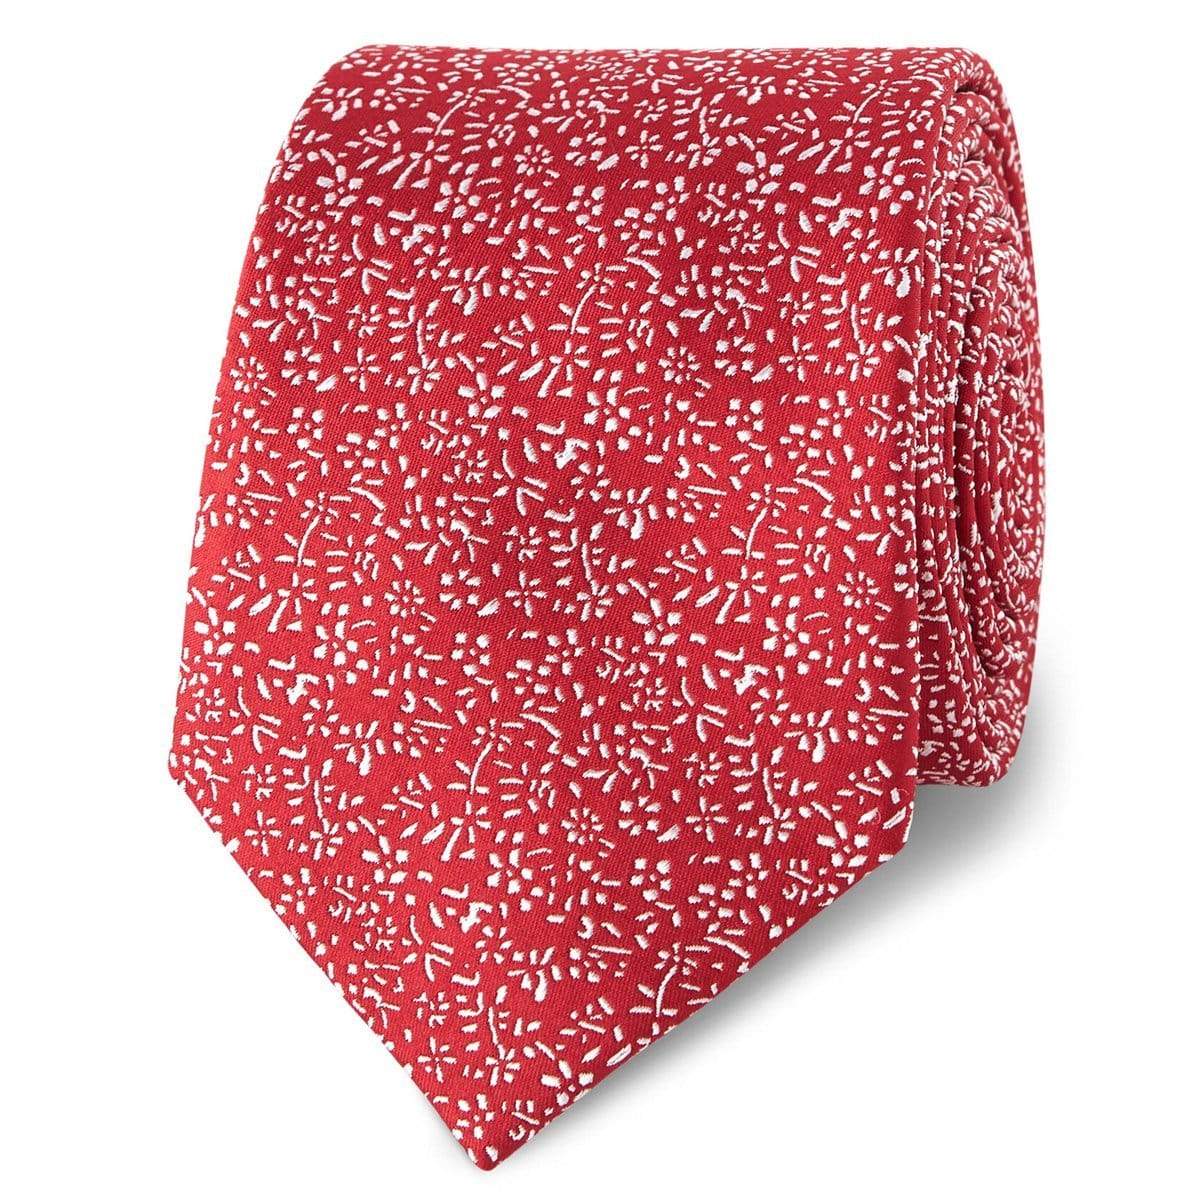 T.M.Lewin-Ditsy-Floral-Tie-Red-and-White-70584-008